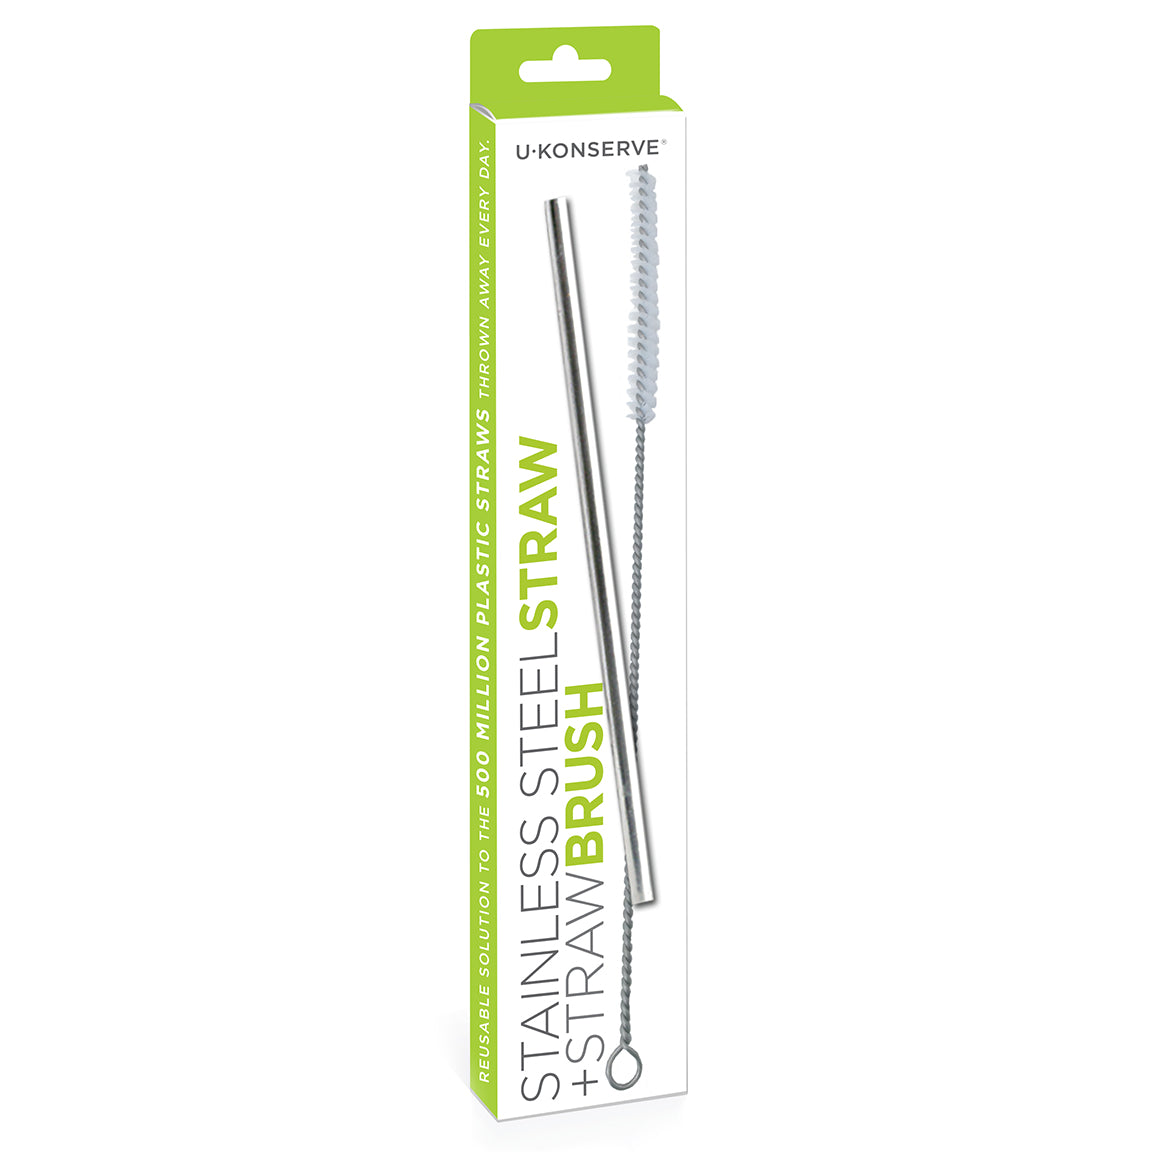 Set of 16 Reusable Stainless Steel Straws with Travel Case